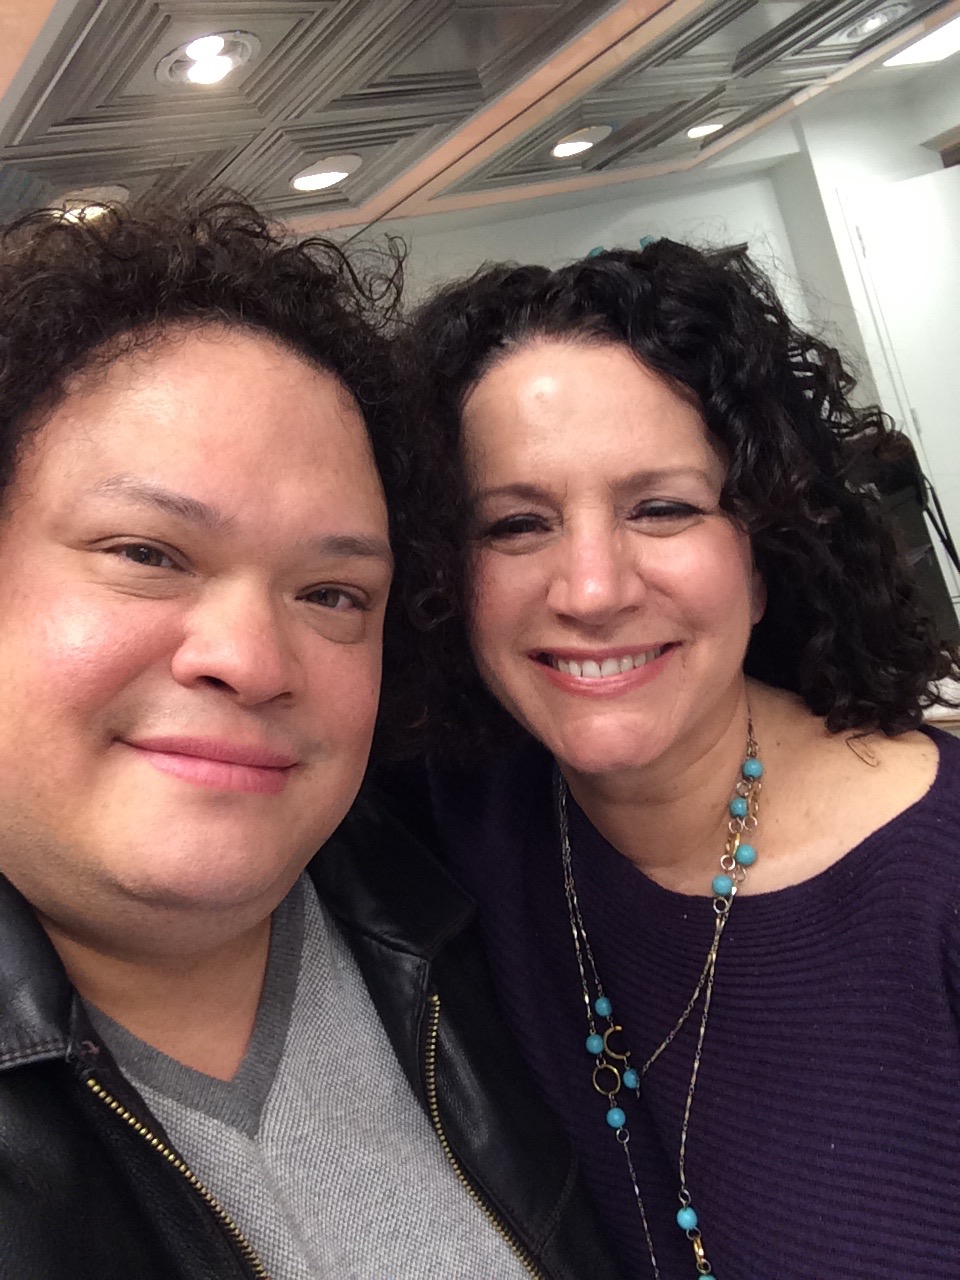 Susie Essman and I from the set of 